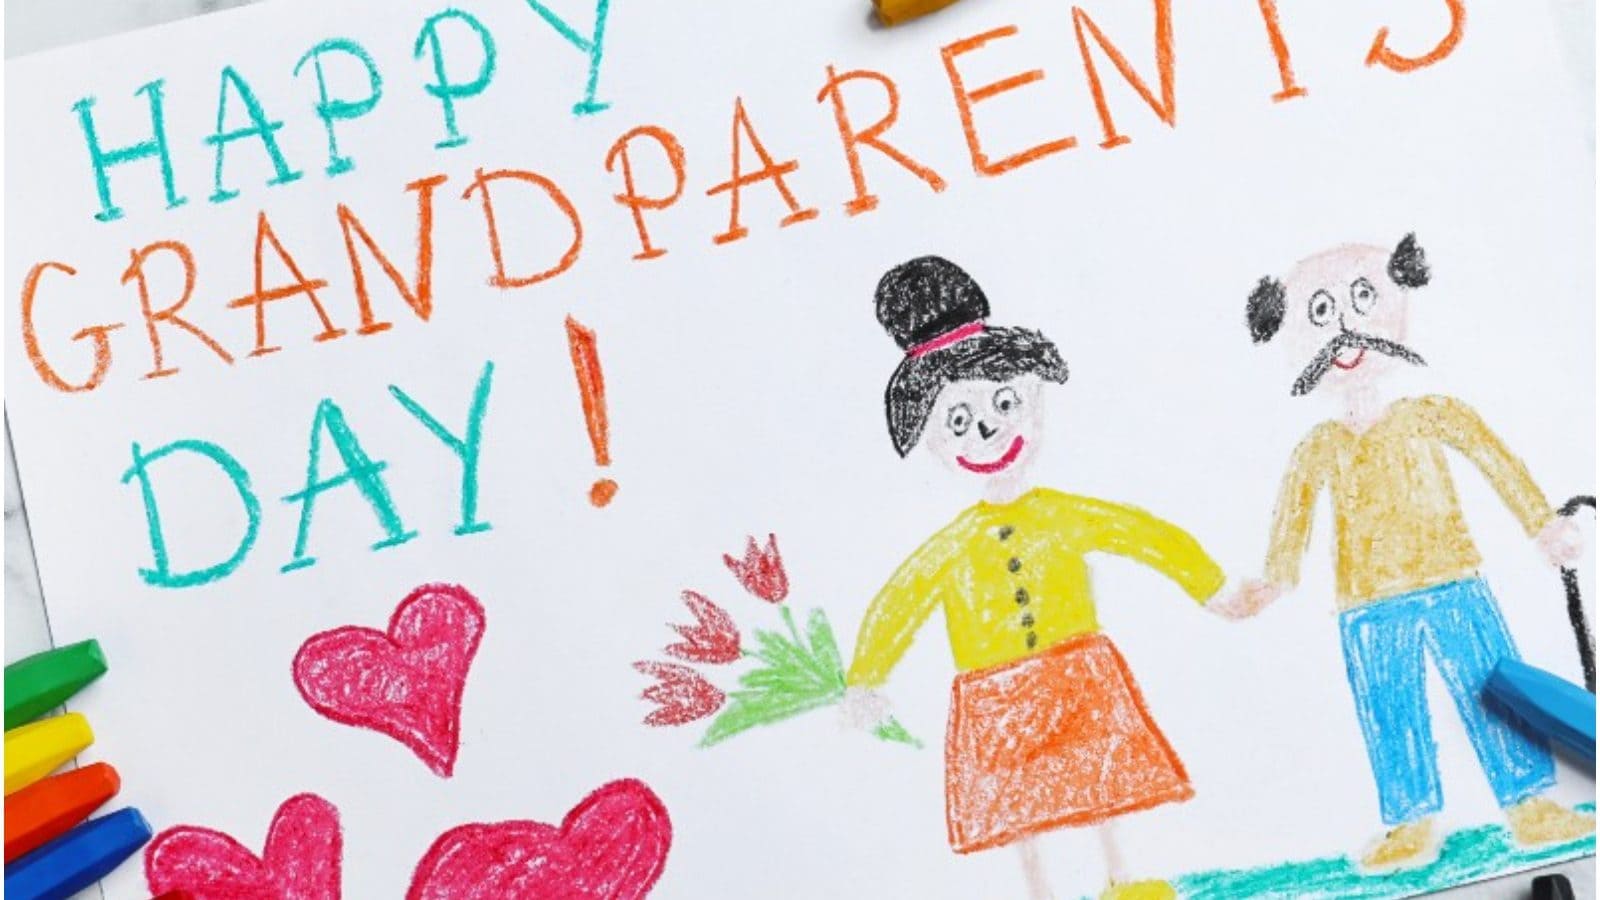 Happy Grandparents Day 2021 Images, Wishes, Quotes, Messages and